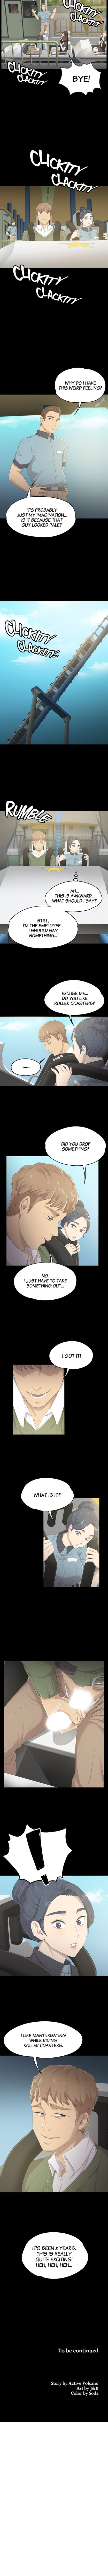 Double Life - Chapter 1 Page 7